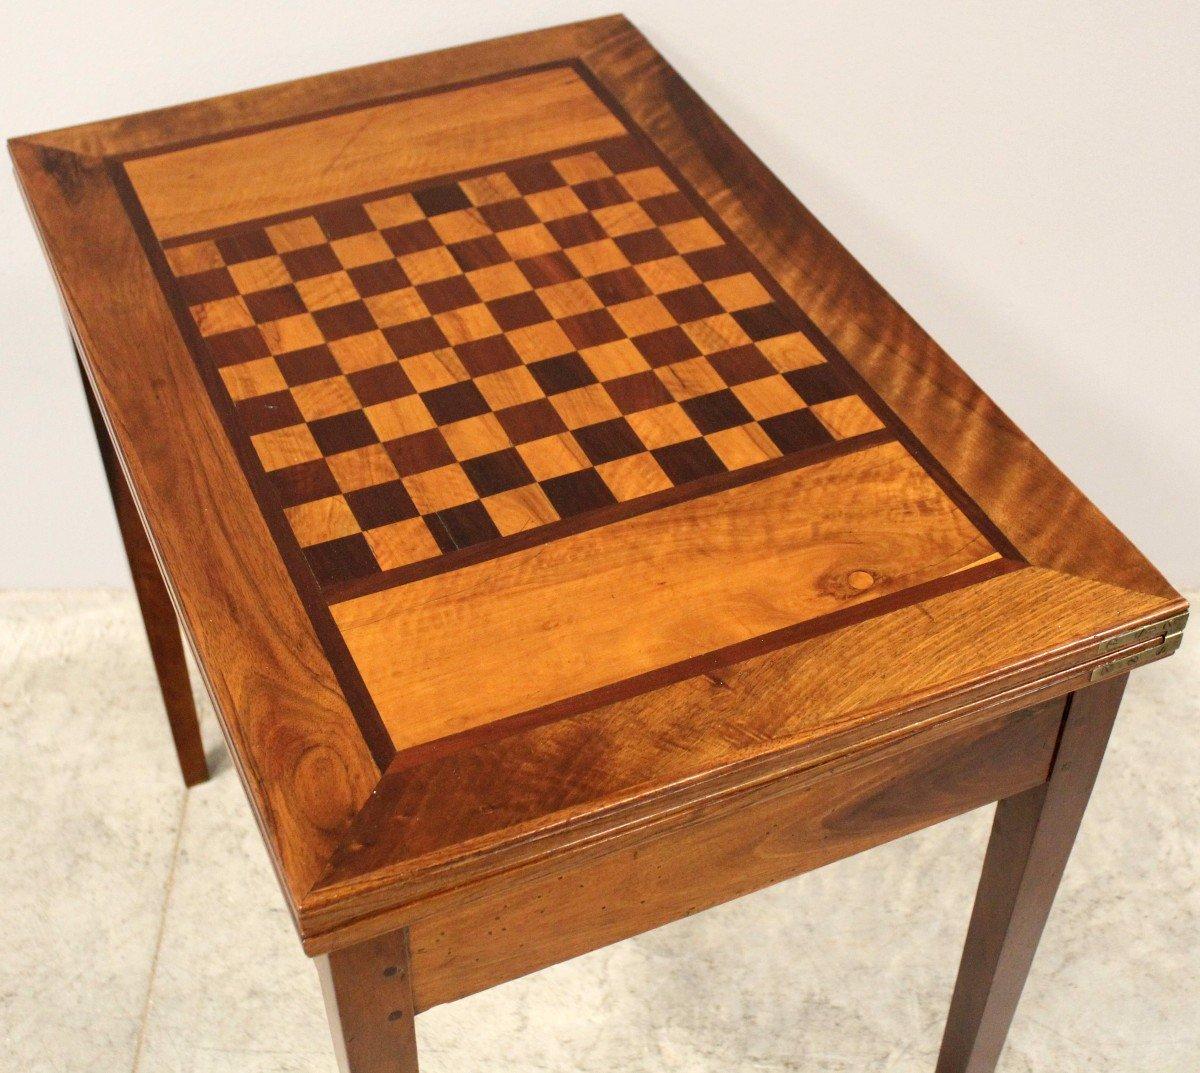 Felt 19th Century Italian Walnut and Mahogany Game Table with Checkerboard Marquetry For Sale